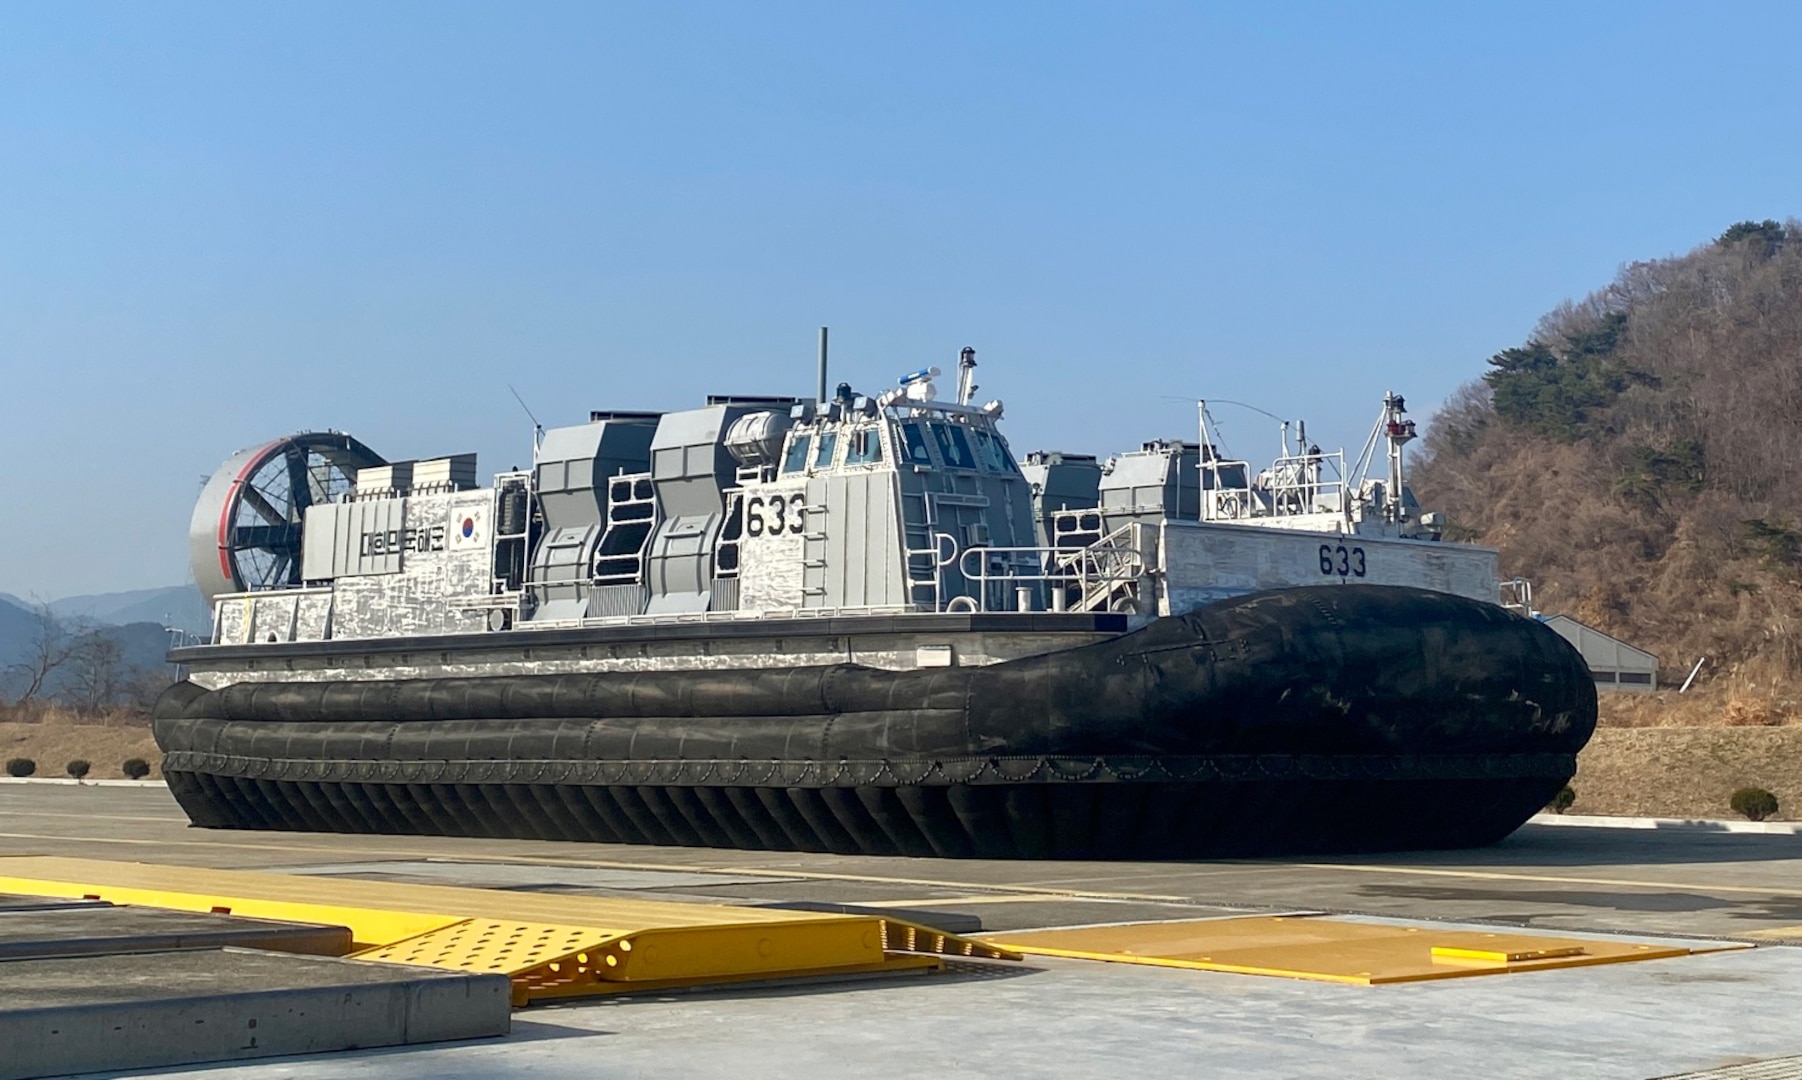 The Landing Ship Fast II (LSF-II) craft 633 is shown after inflating the skirting. This December 2022 operation tested the Command, Control, Communication, Computers, and Navigation (C4N) system for operating the engine and running the lift fans used to inflate the bags in the skirting, and the propellers and air ducts used to maneuver the craft on the tarmac. This is the first time the C4N operated as a system and actively controlled functions aboard the vessel. (courtesy photo provided by Hanjin Shipbuilding and Construction with permission from the Republic of Korea Defense Acquisition Program Administration)